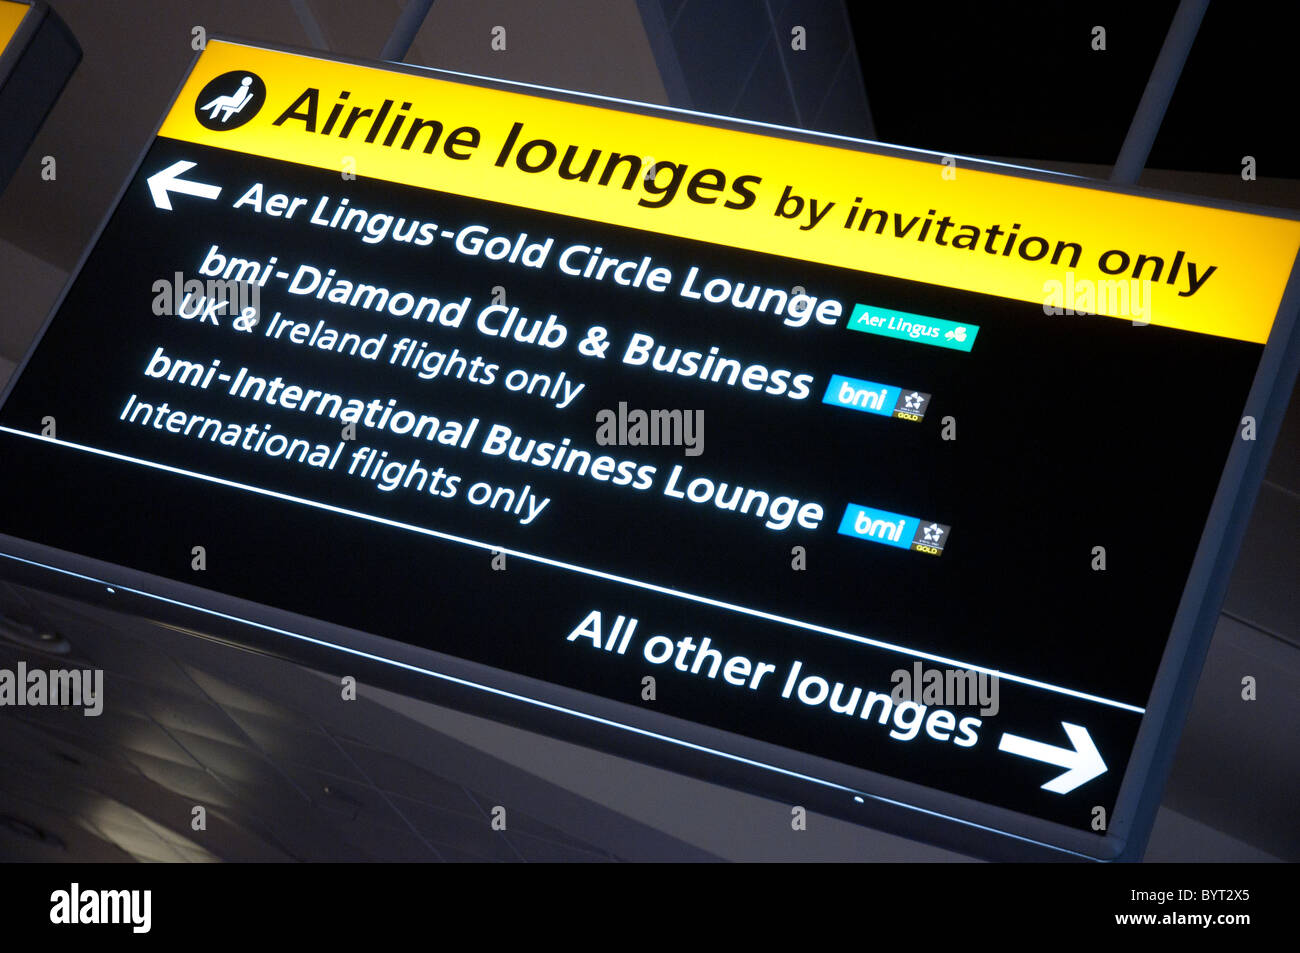 Airline lounge sign at London Heathrow airport, UK Stock Photo